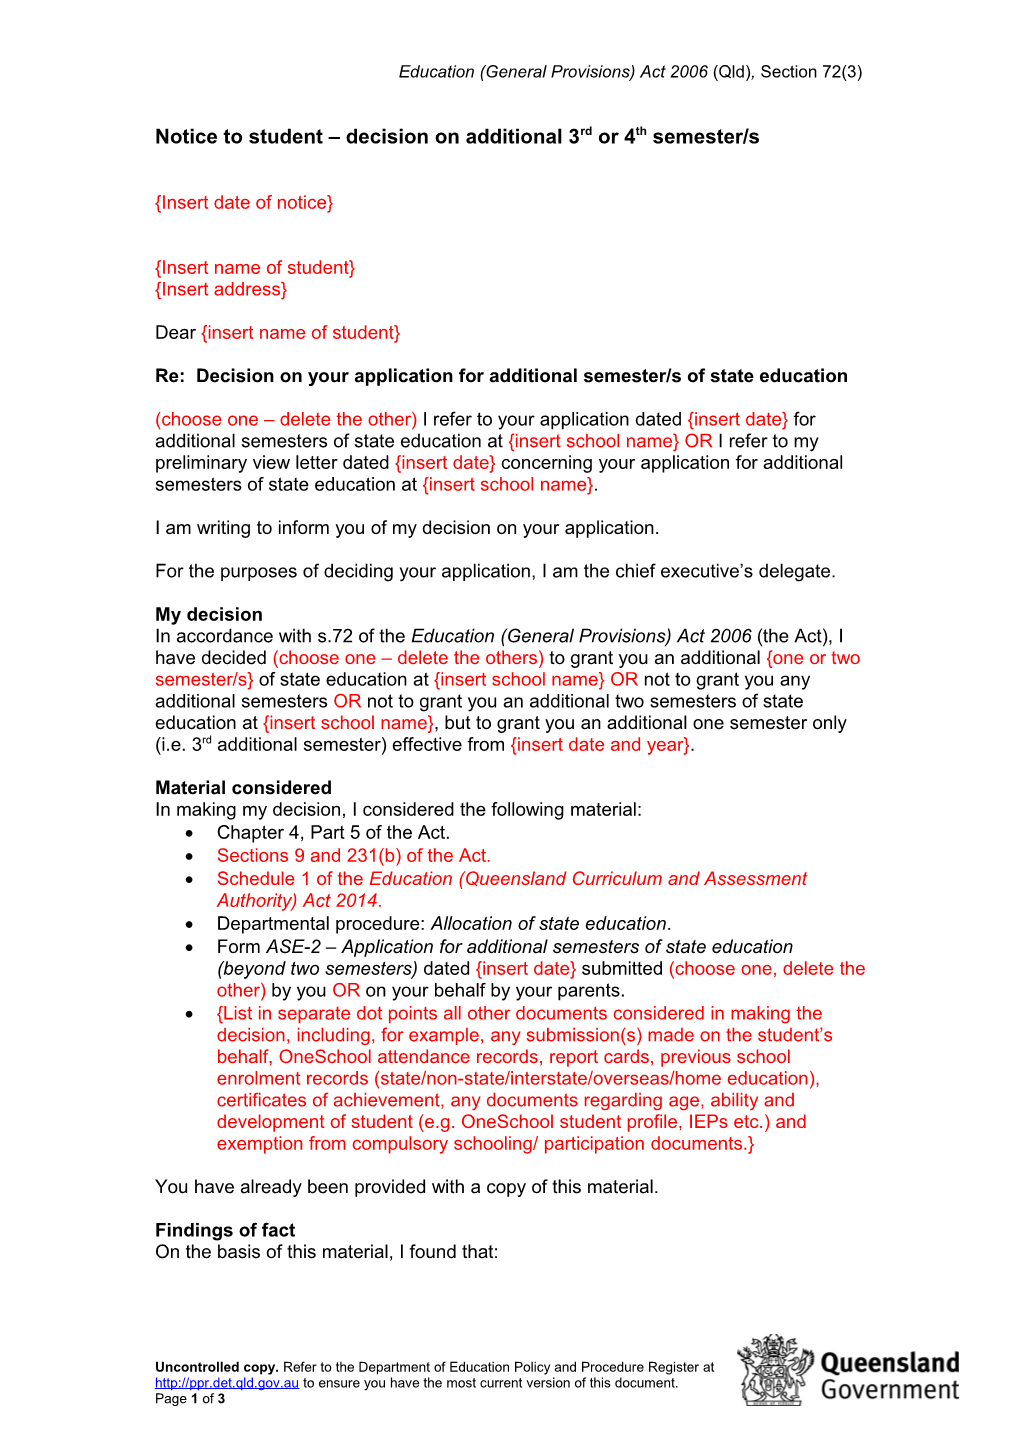 Template Letter: Notice to Student Decision on Additional 3Rd Or 4Th Semesters